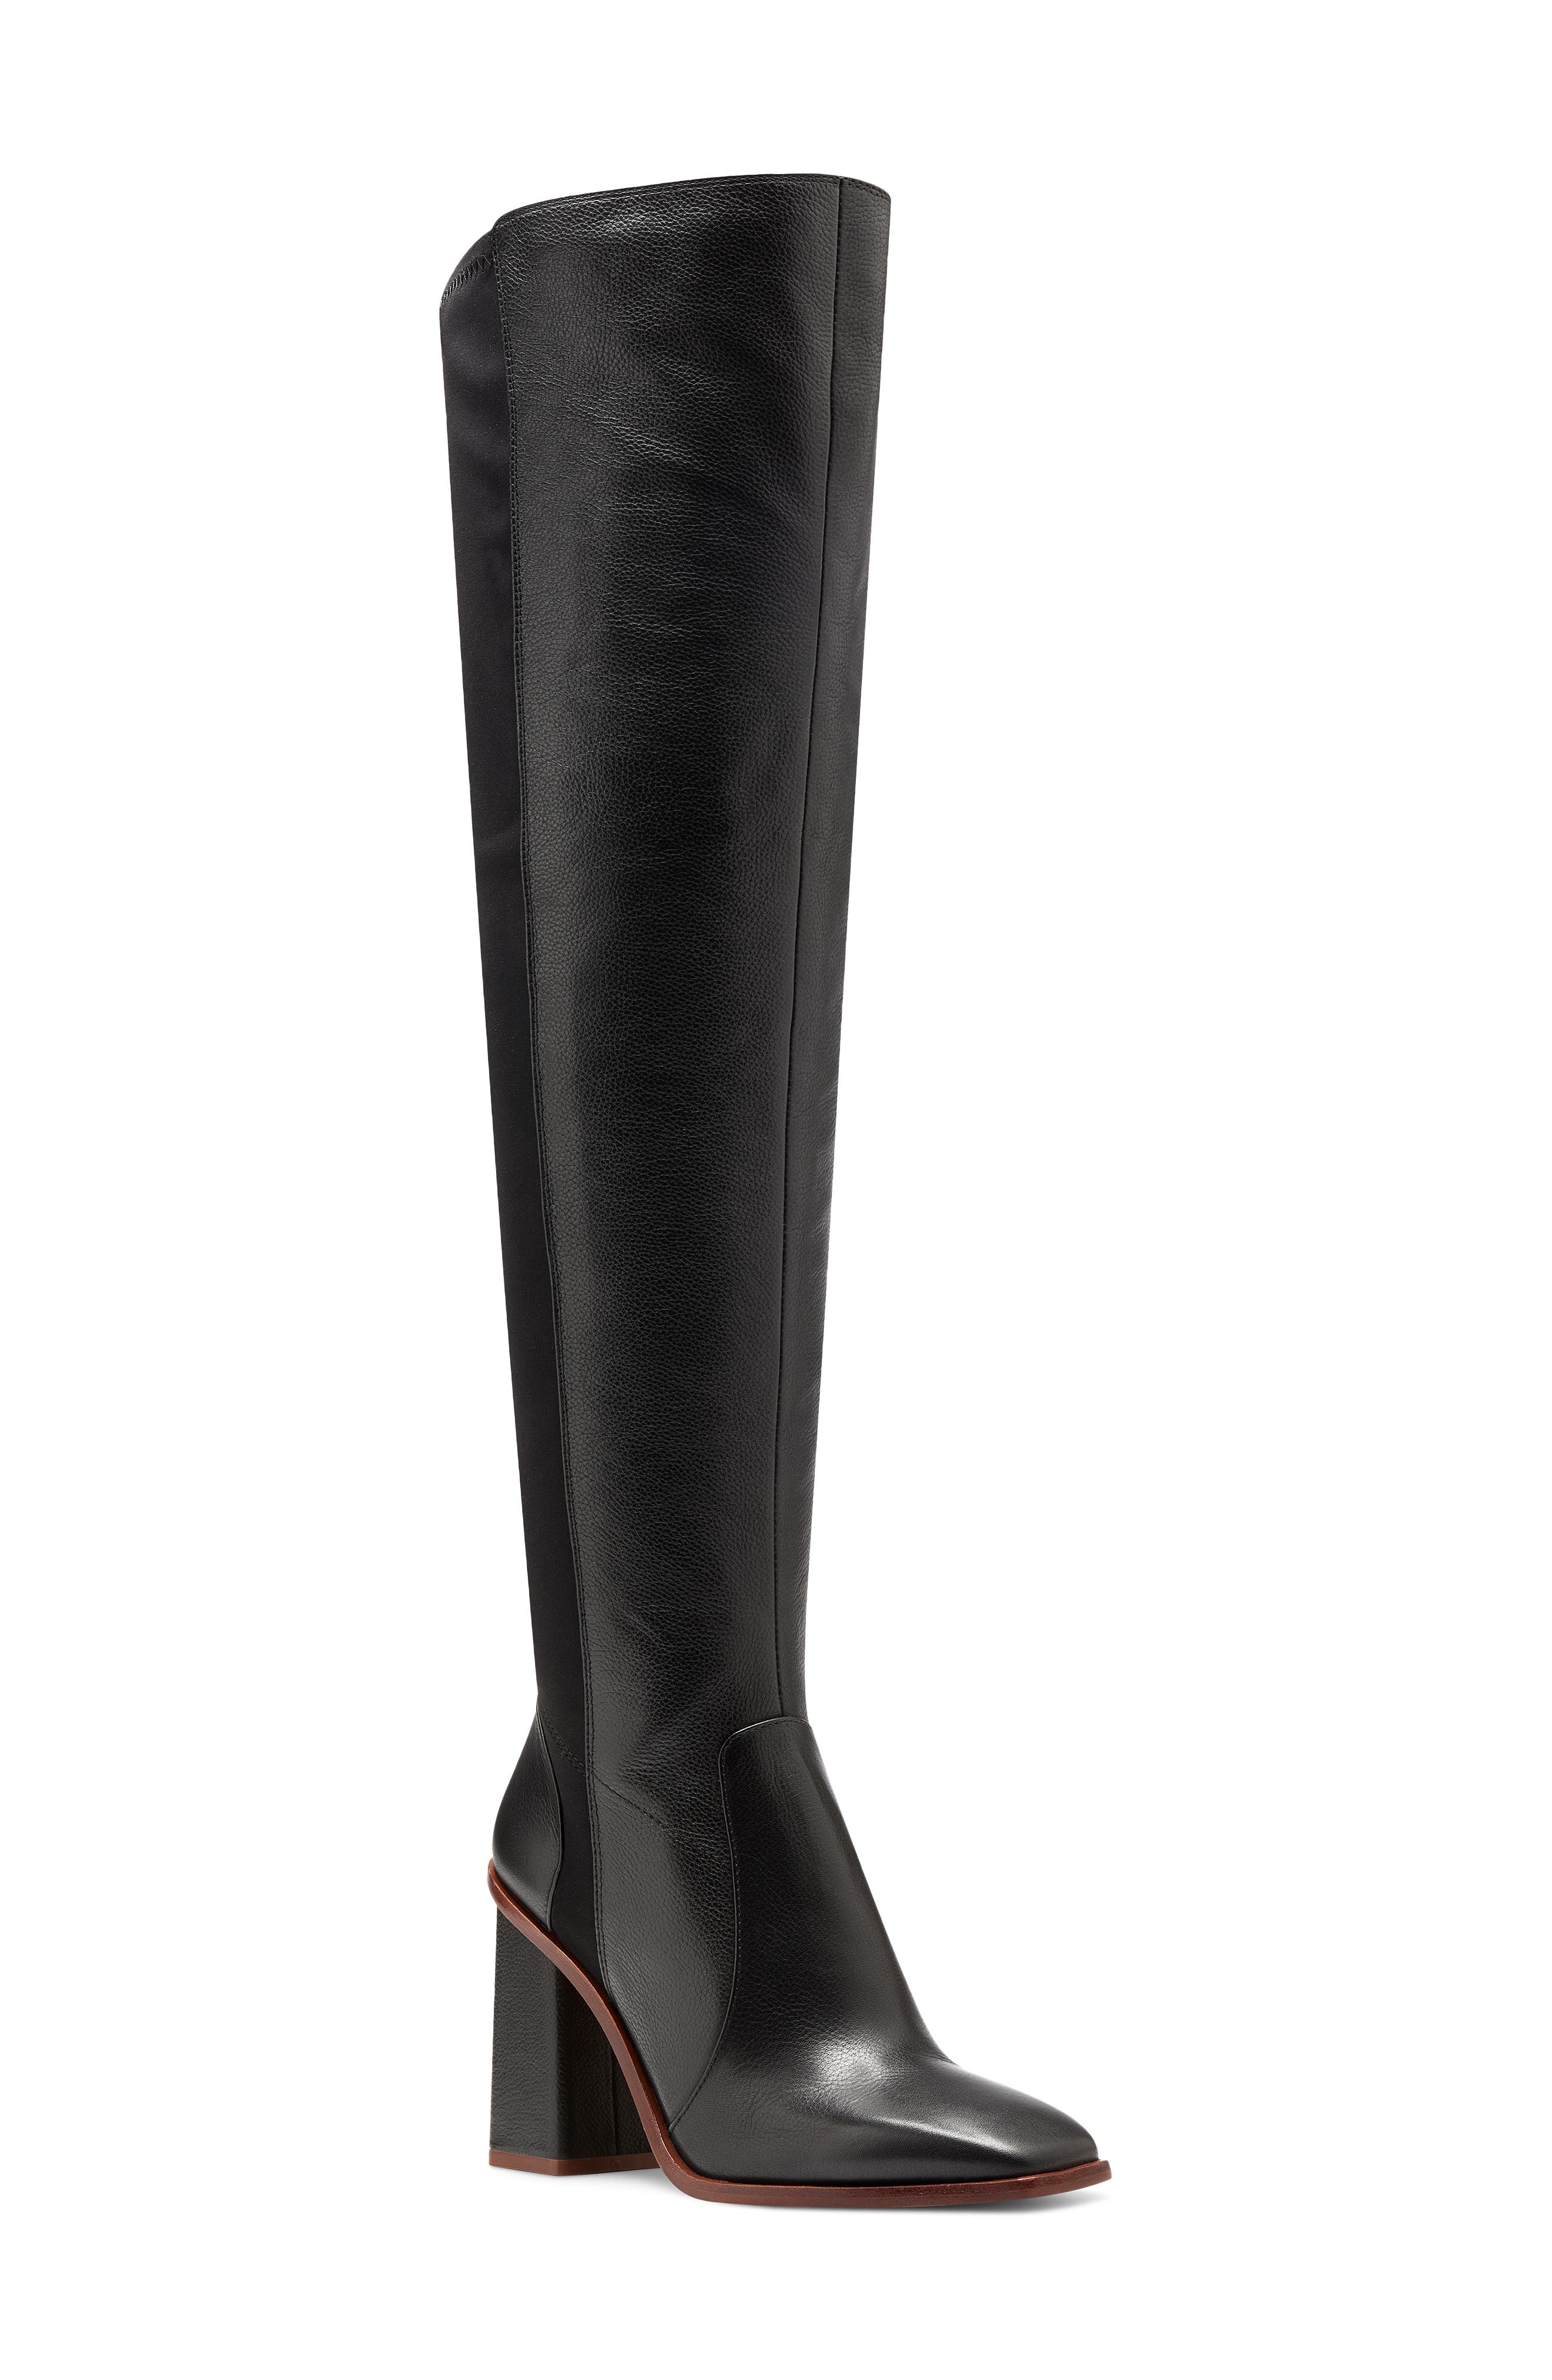 UPC 194307349518 product image for Women's Vince Camuto Dreven Over The Knee Boot, Size 5 M - Black | upcitemdb.com